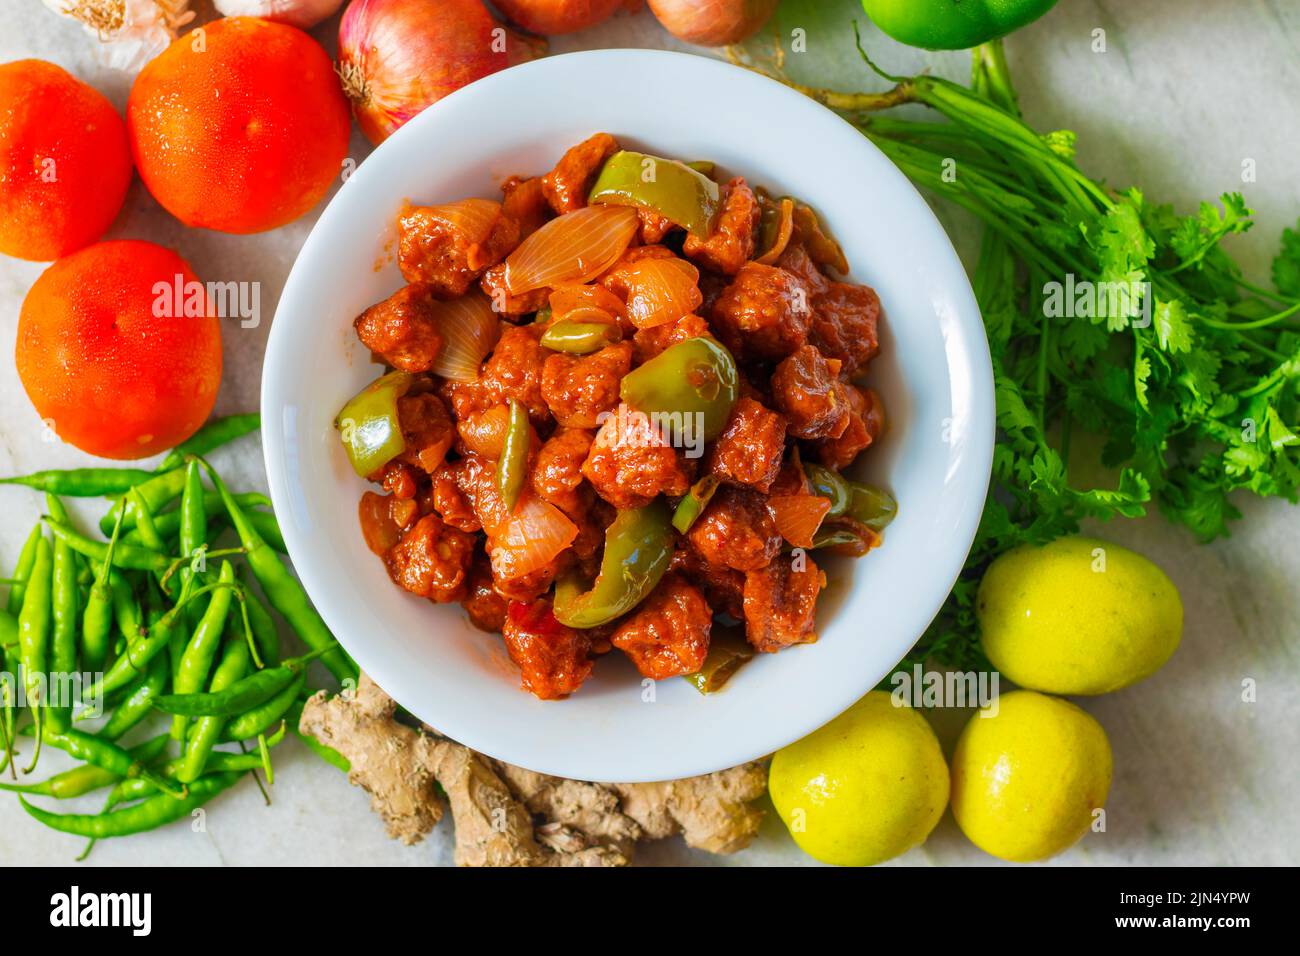 selective focus of Soya Manchurian/Chili Soya bean chunks recipe. with a decorative background. Stock Photo